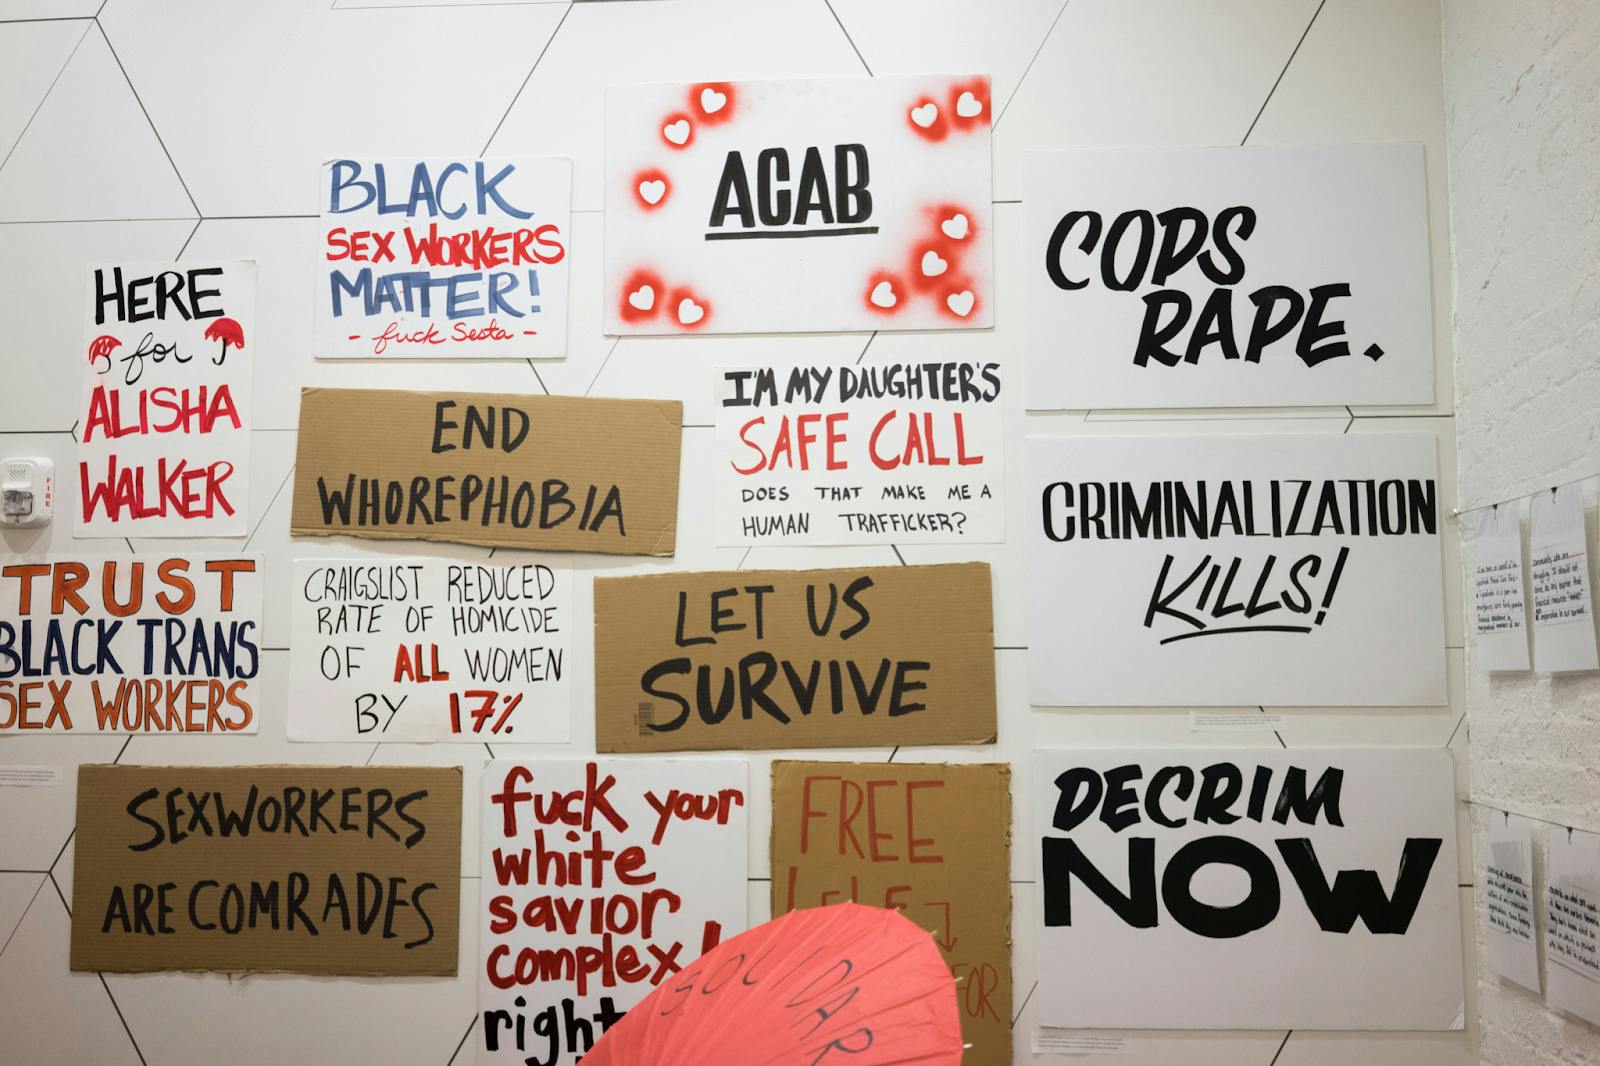 Fourteen protest signs on poster board and cardboard, featuring red and black lettering, are mounted and arranged on a white wall. Their messages range from calls to free incarcerated sex workers and to protect and trust Black trans sex workers, to declaratives against the police and criminalization.